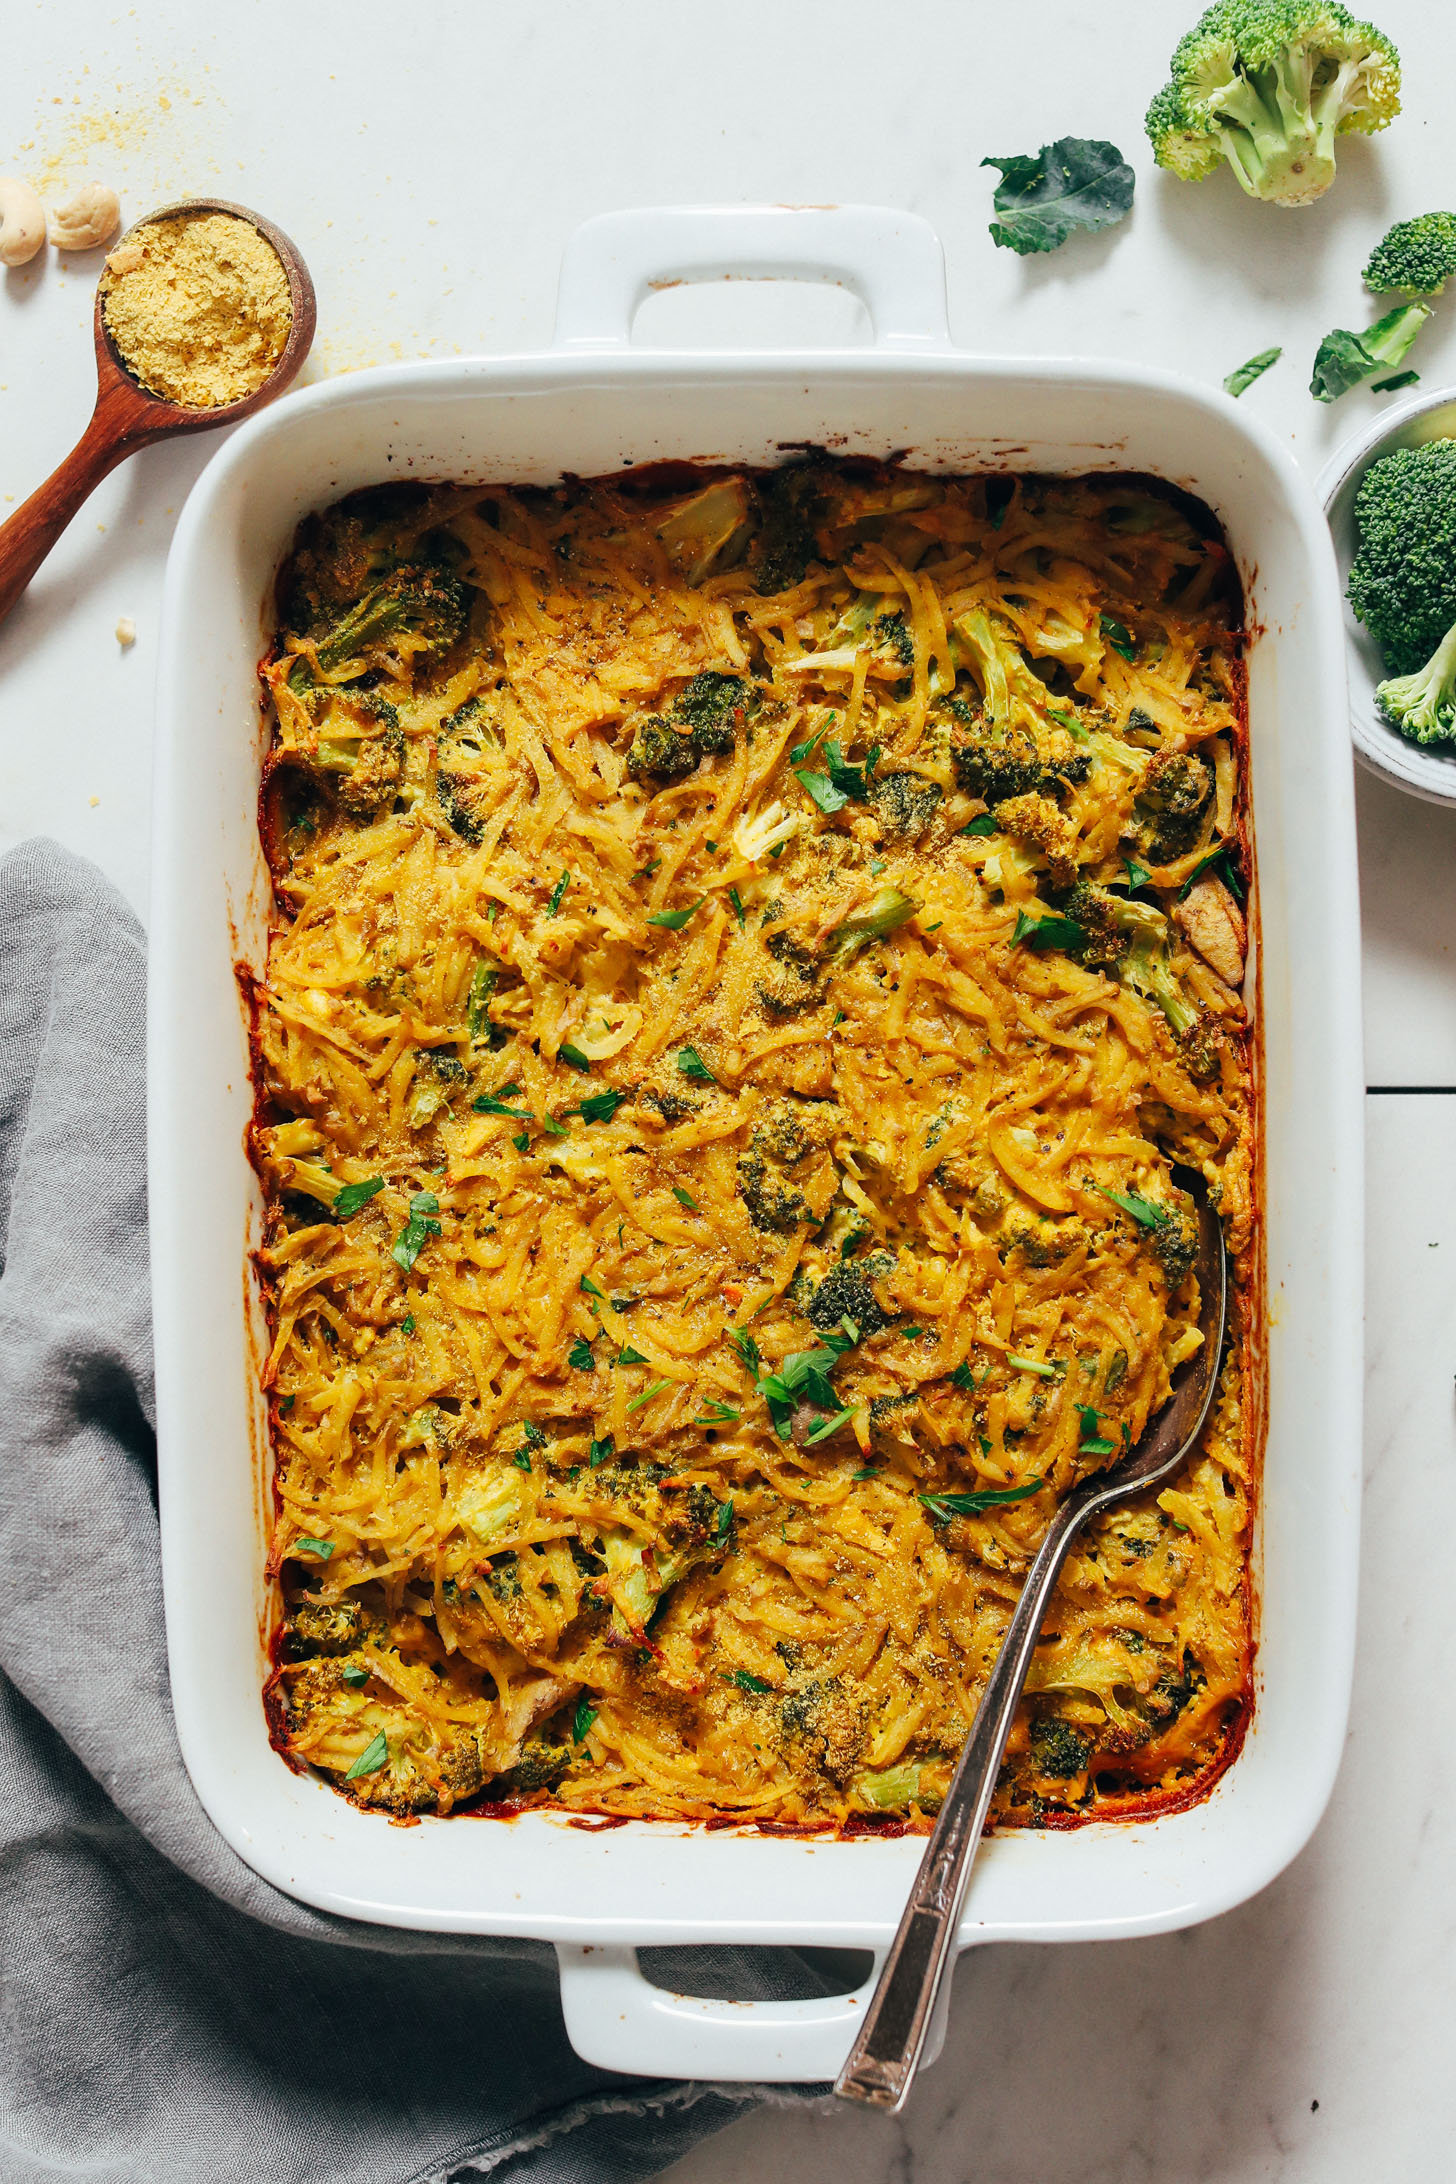 Vintage spoon in a pan of Cheesy Broccoli Hash Brown Bake